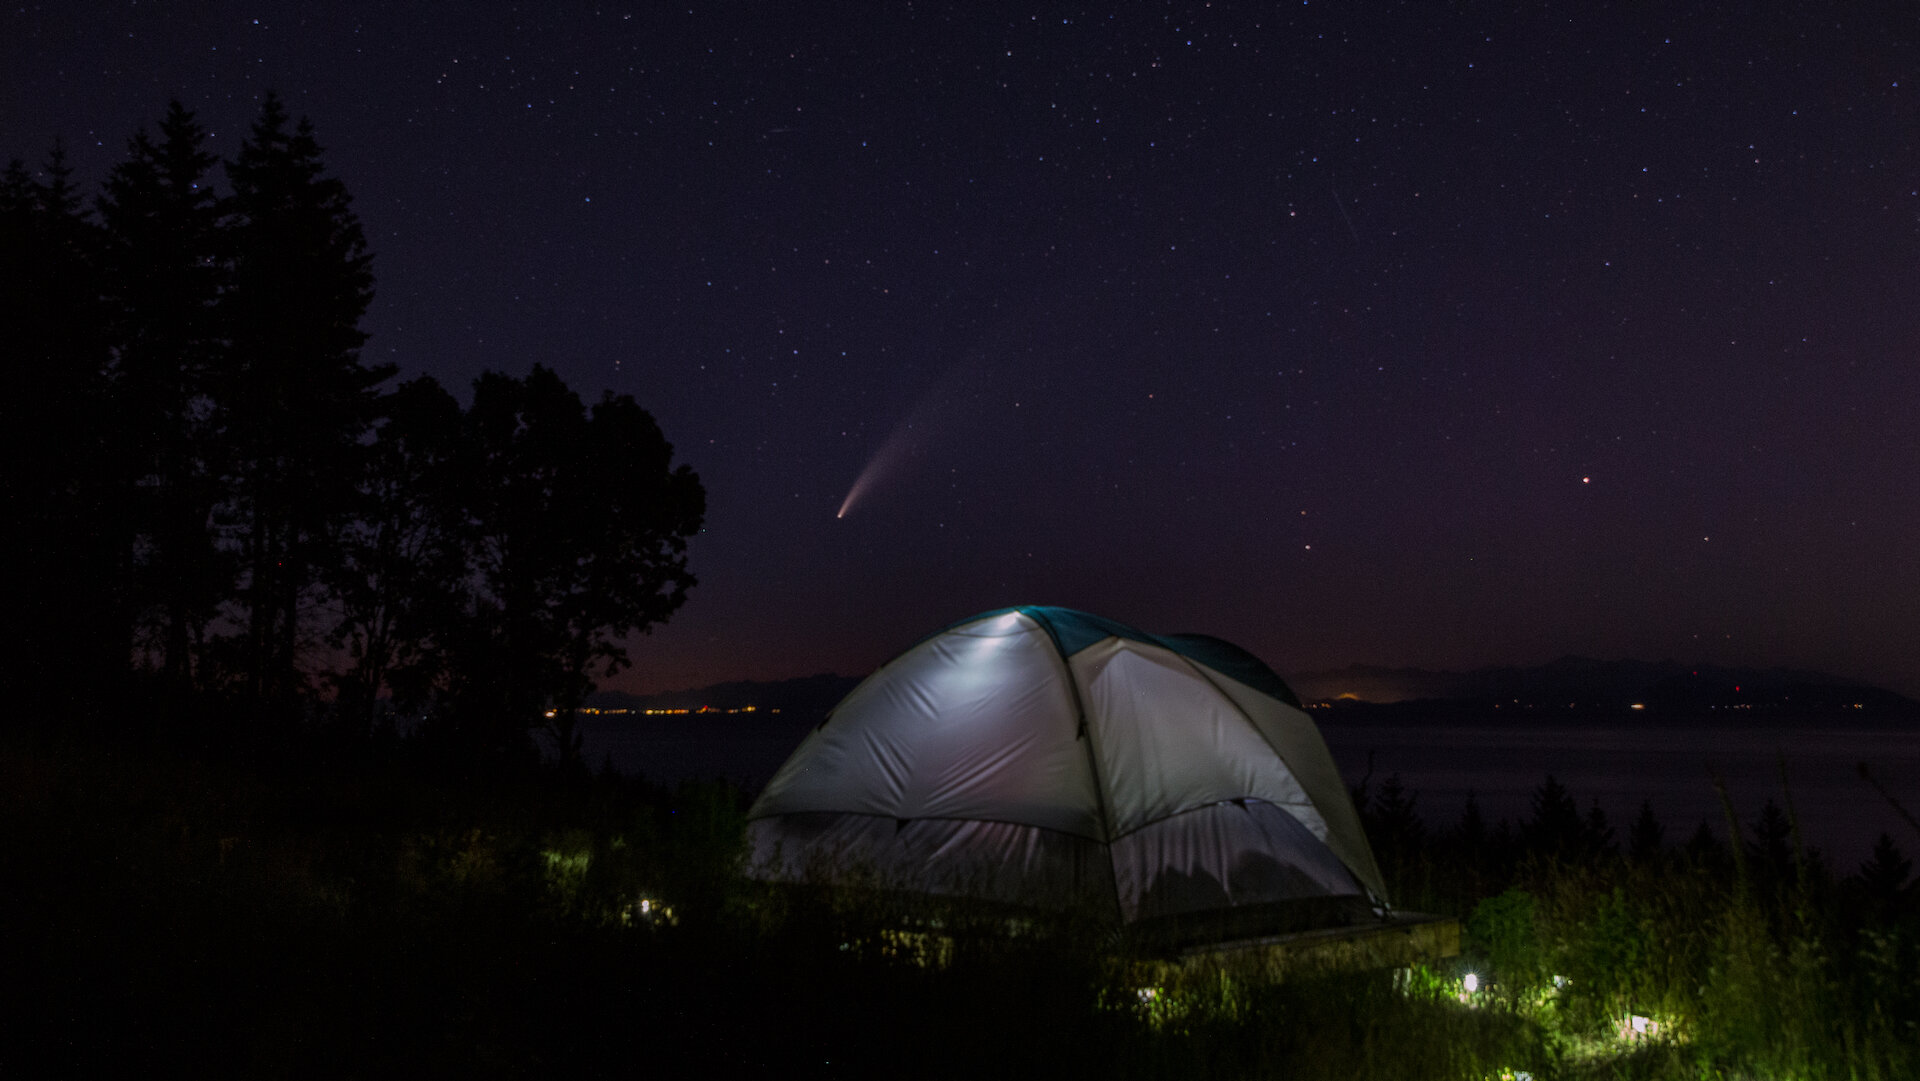  Tent and comet 